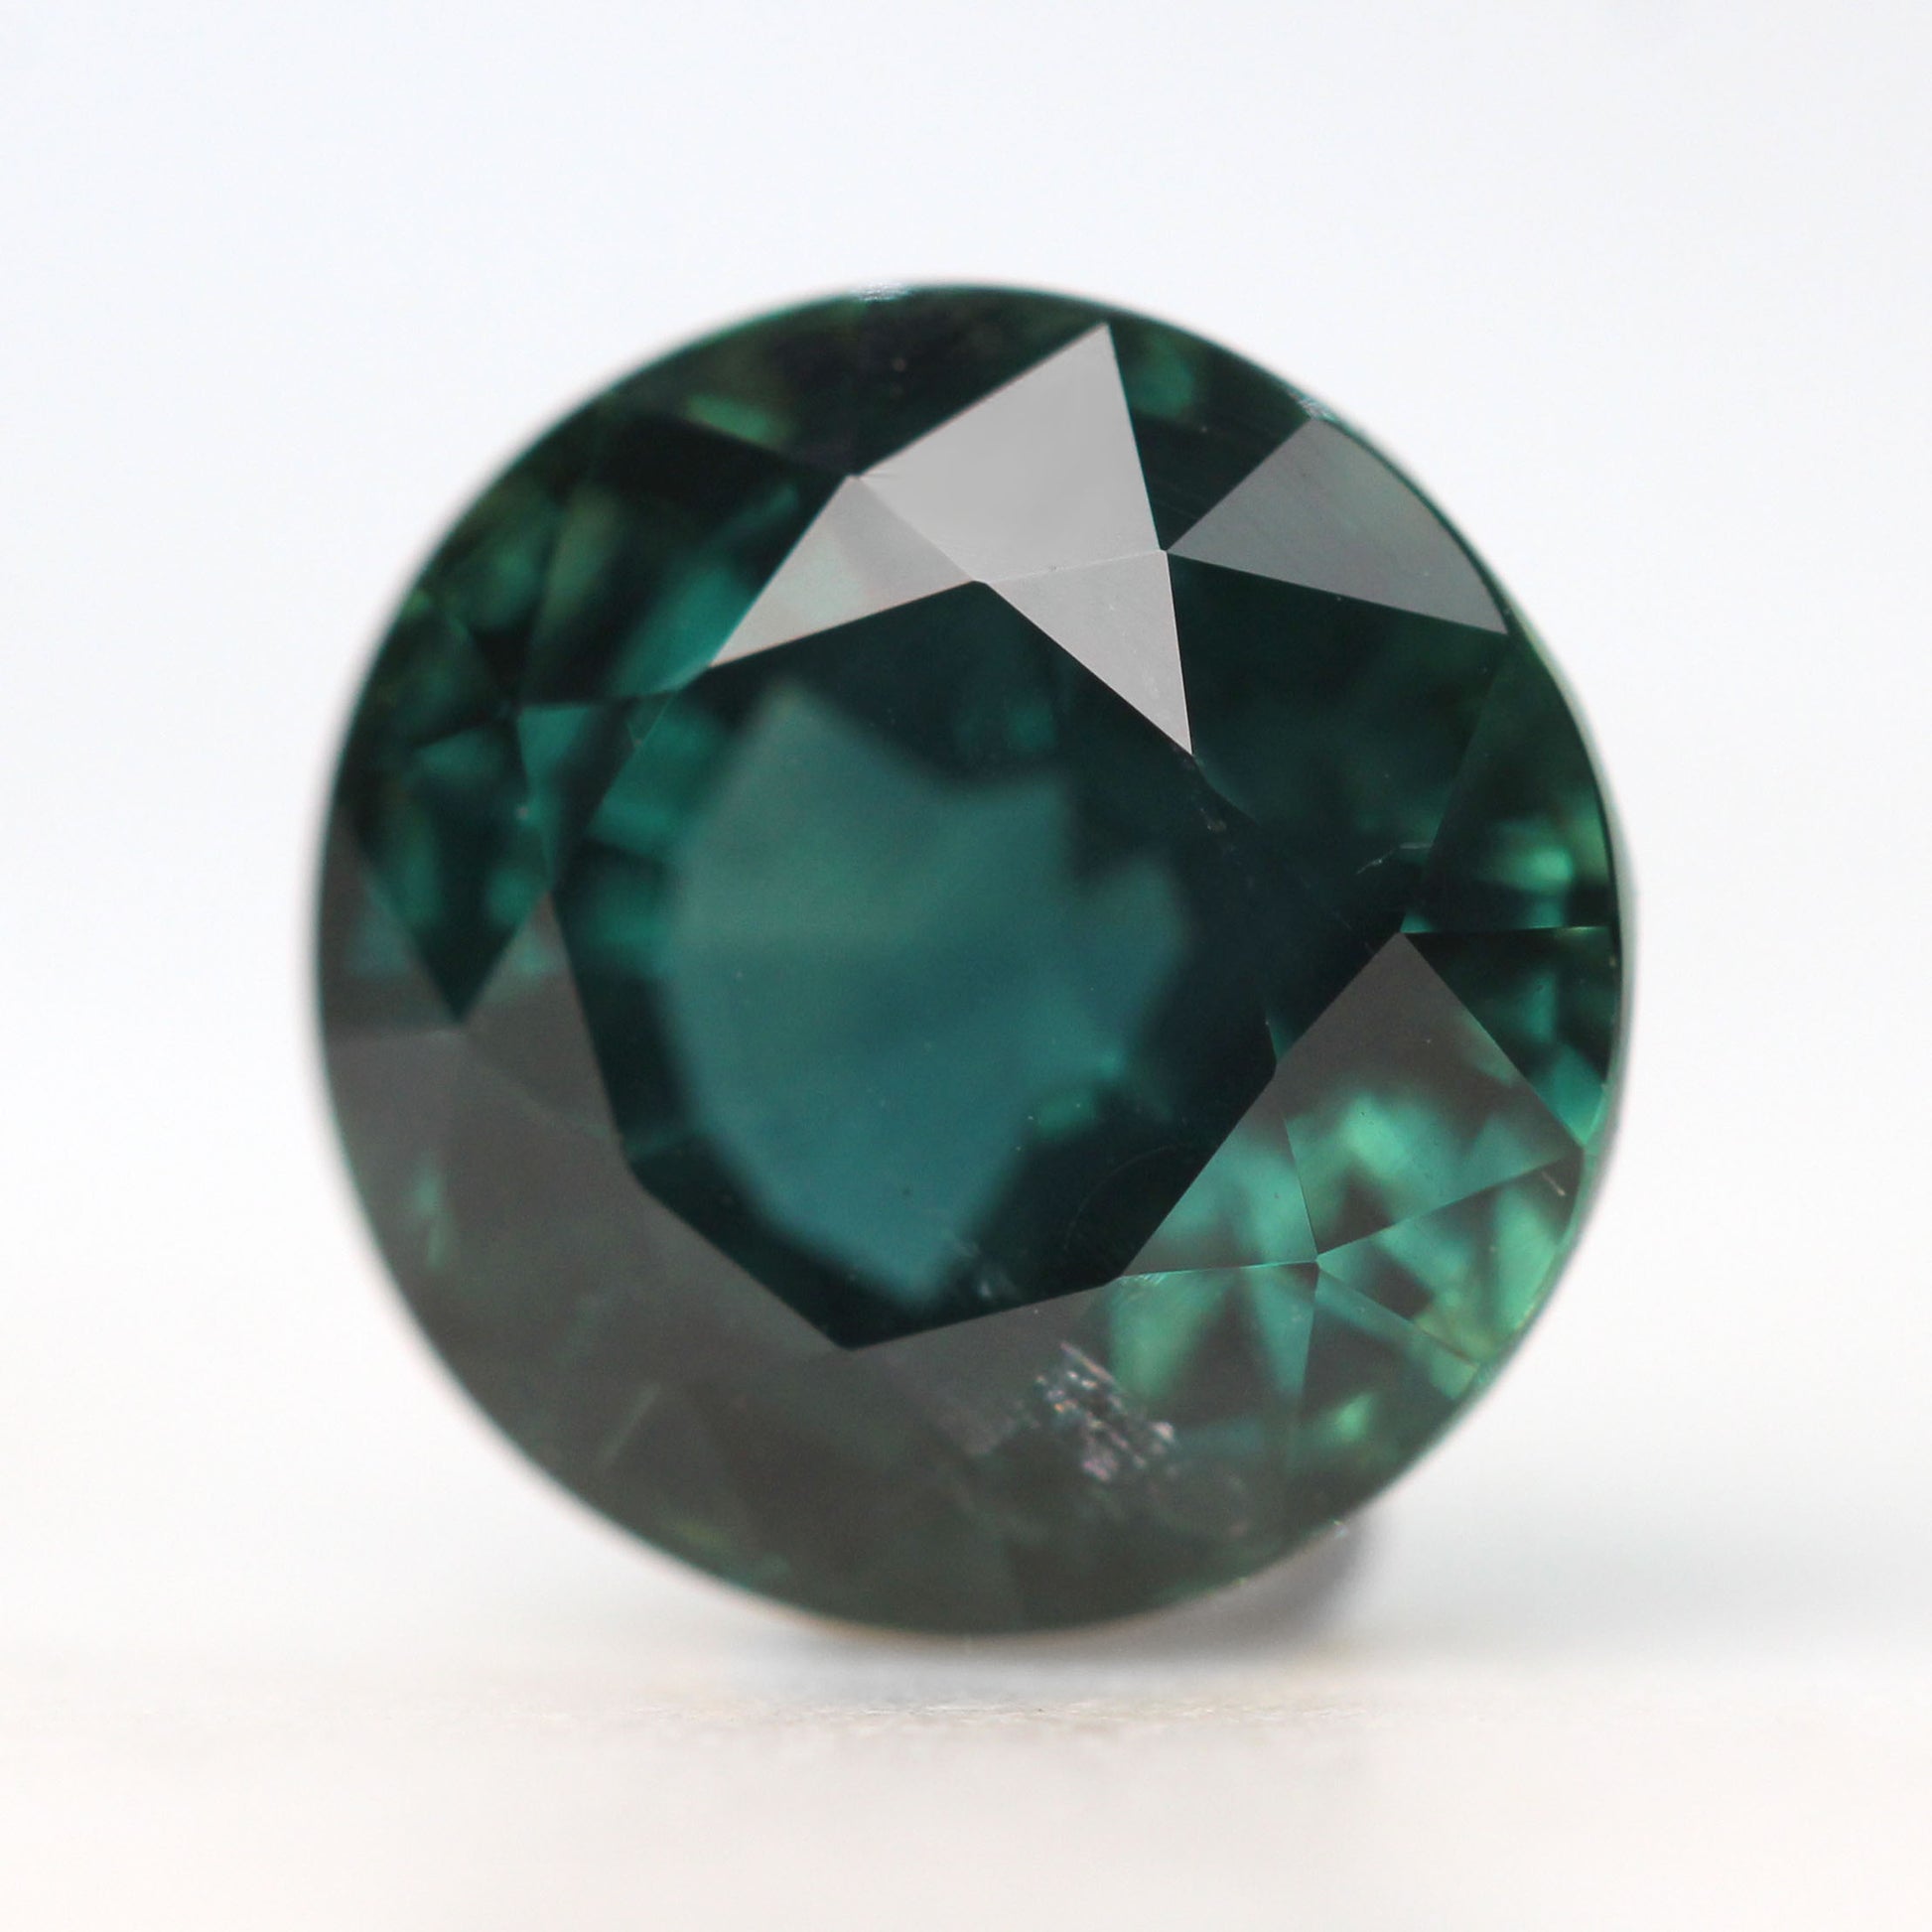 4.87 Carat GIA Certified Round Dark Teal Green Sapphire for Custom Work - Inventory Code RGSAP487 - Midwinter Co. Alternative Bridal Rings and Modern Fine Jewelry